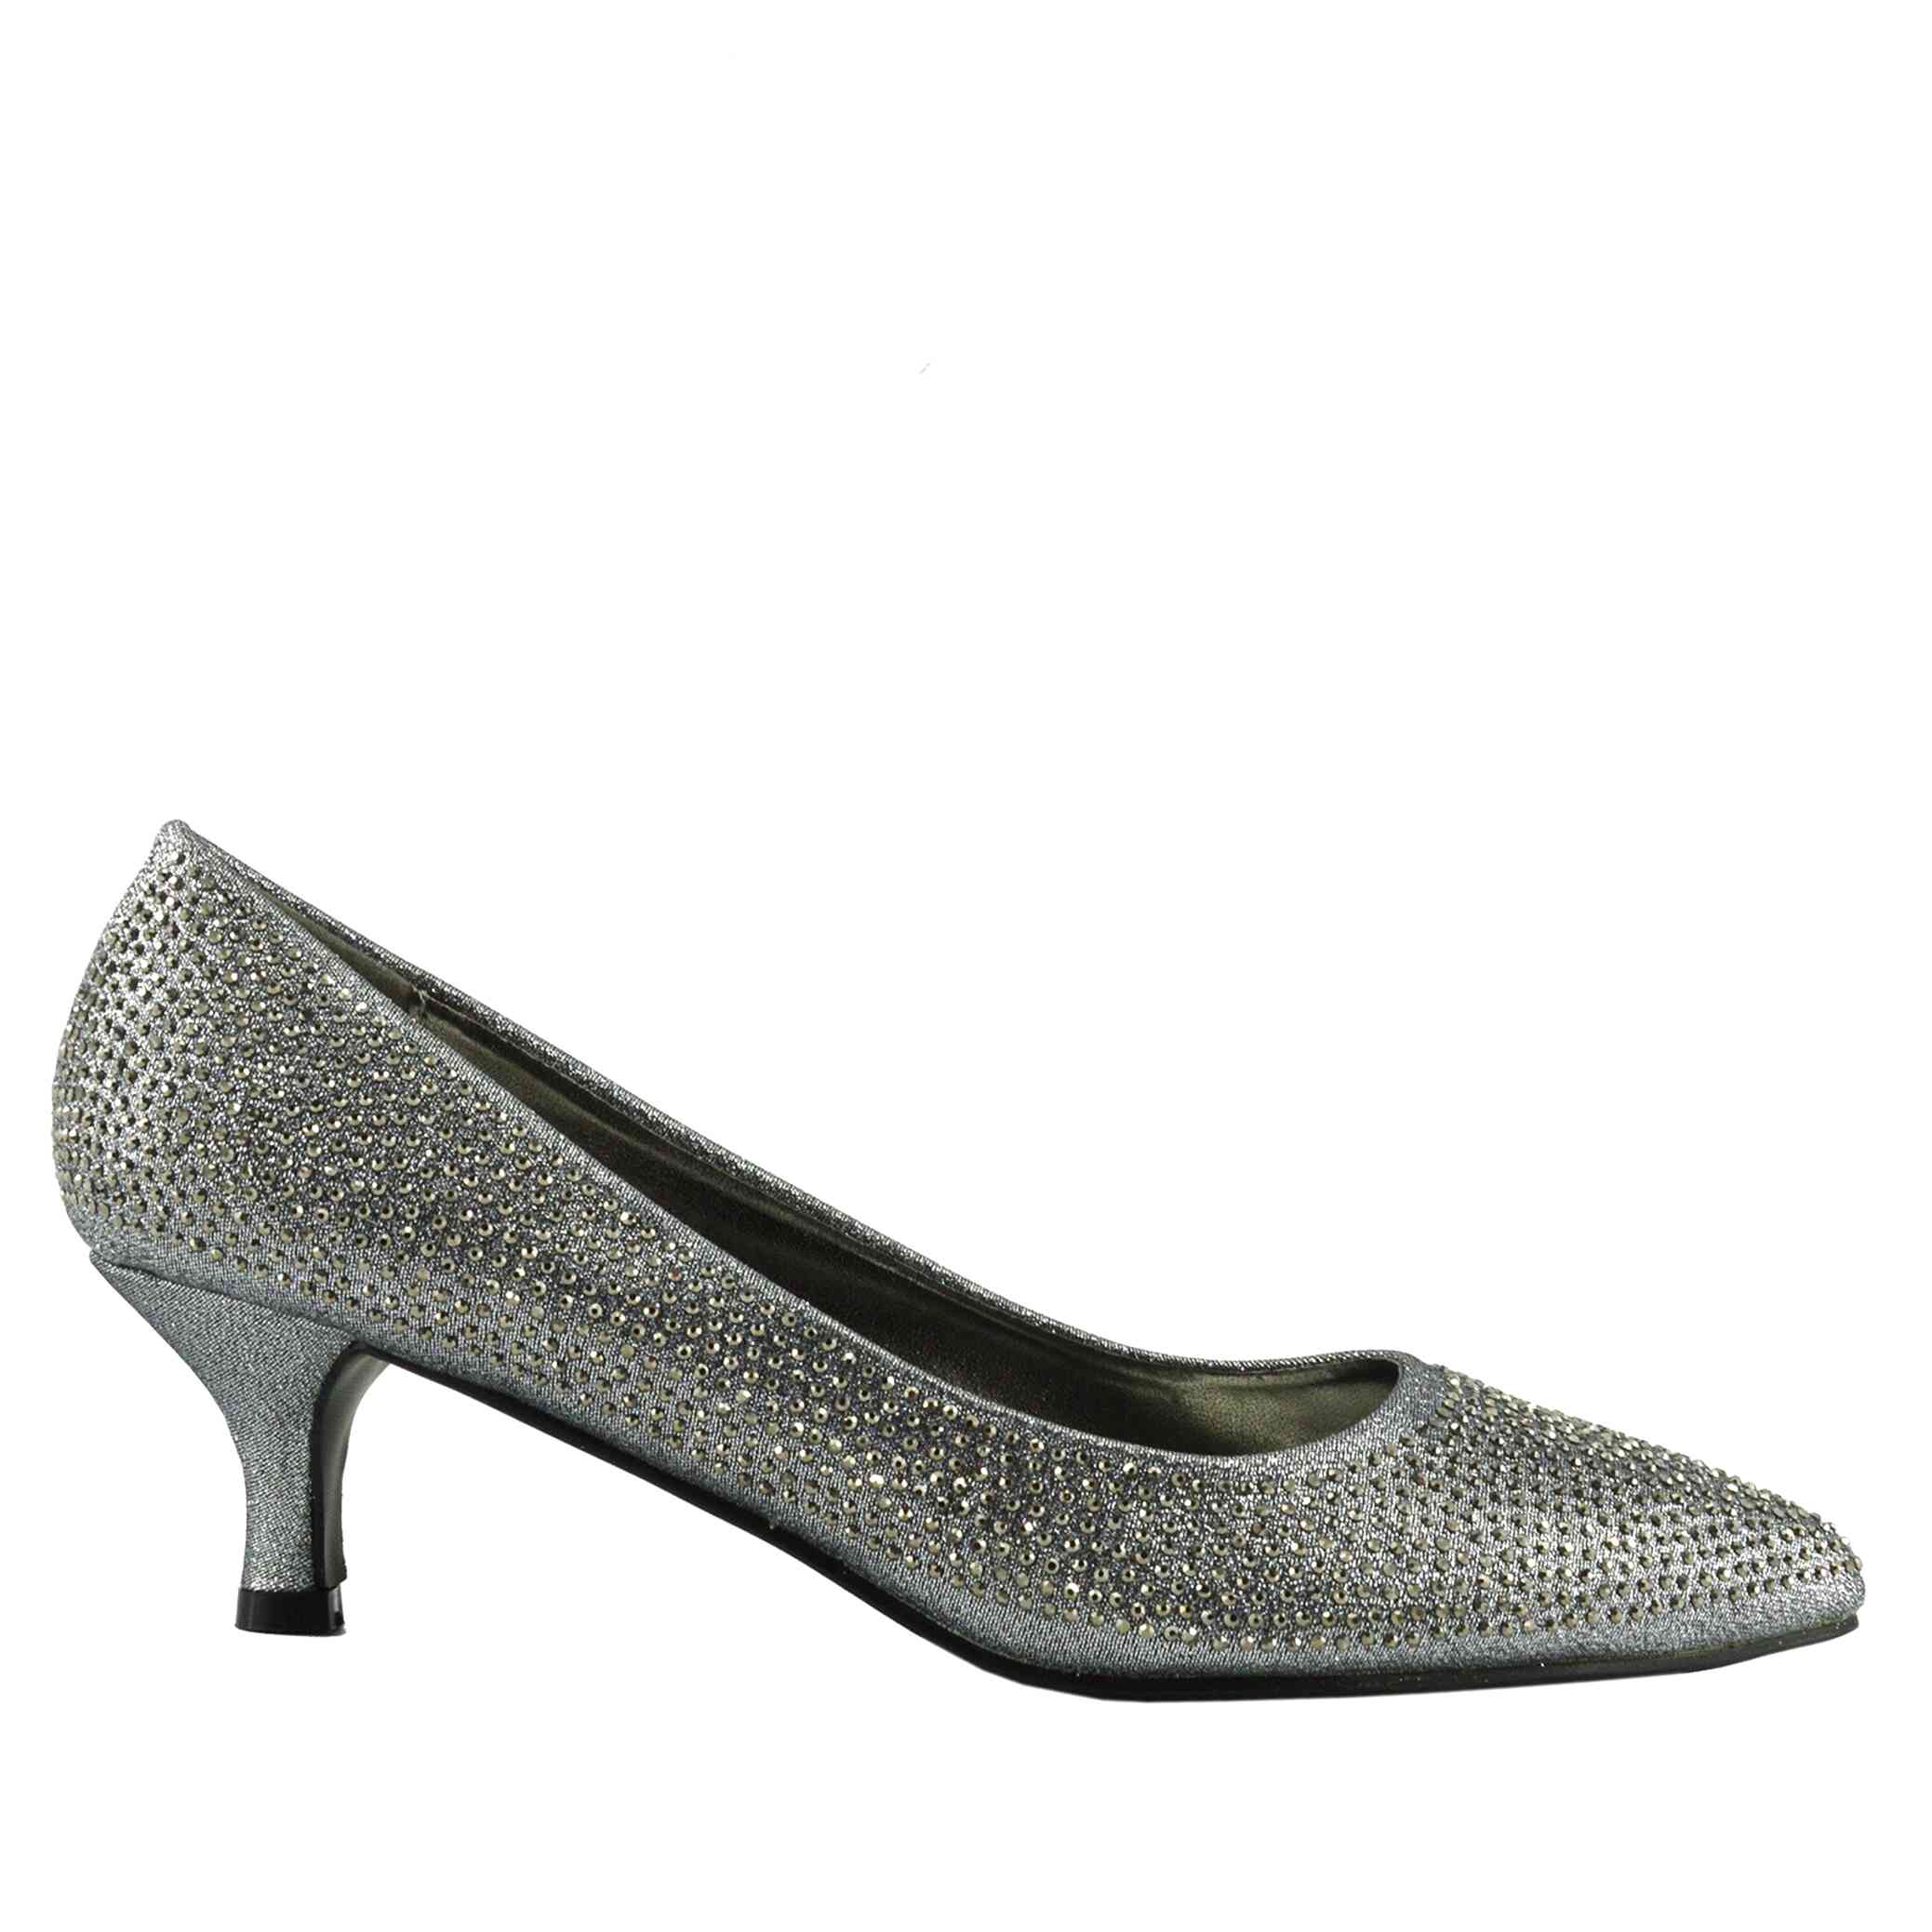 Ladies Pewter Shoes for sale in UK | 61 used Ladies Pewter Shoes